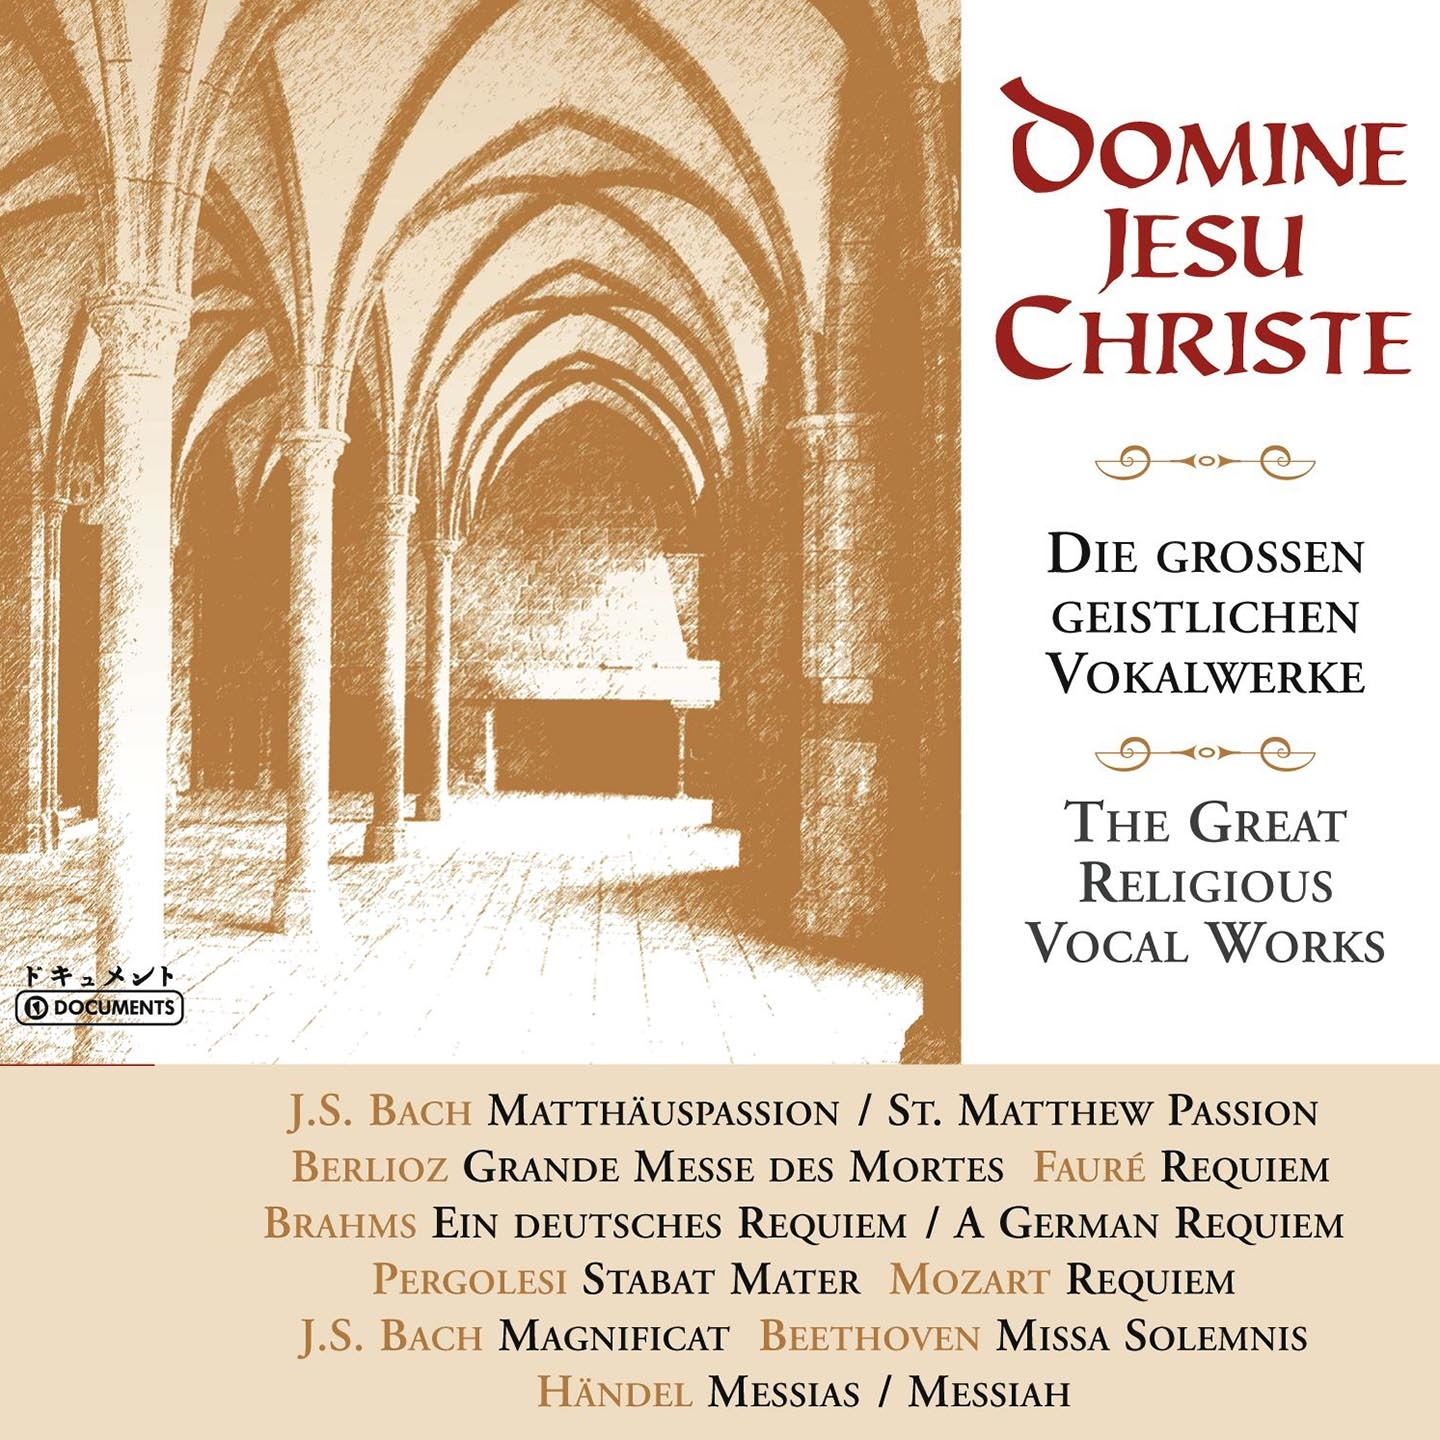 DOMINE JESU CHIRSTE: MUSIC BY BACH, BEETHOVEN, MOZART ETC.